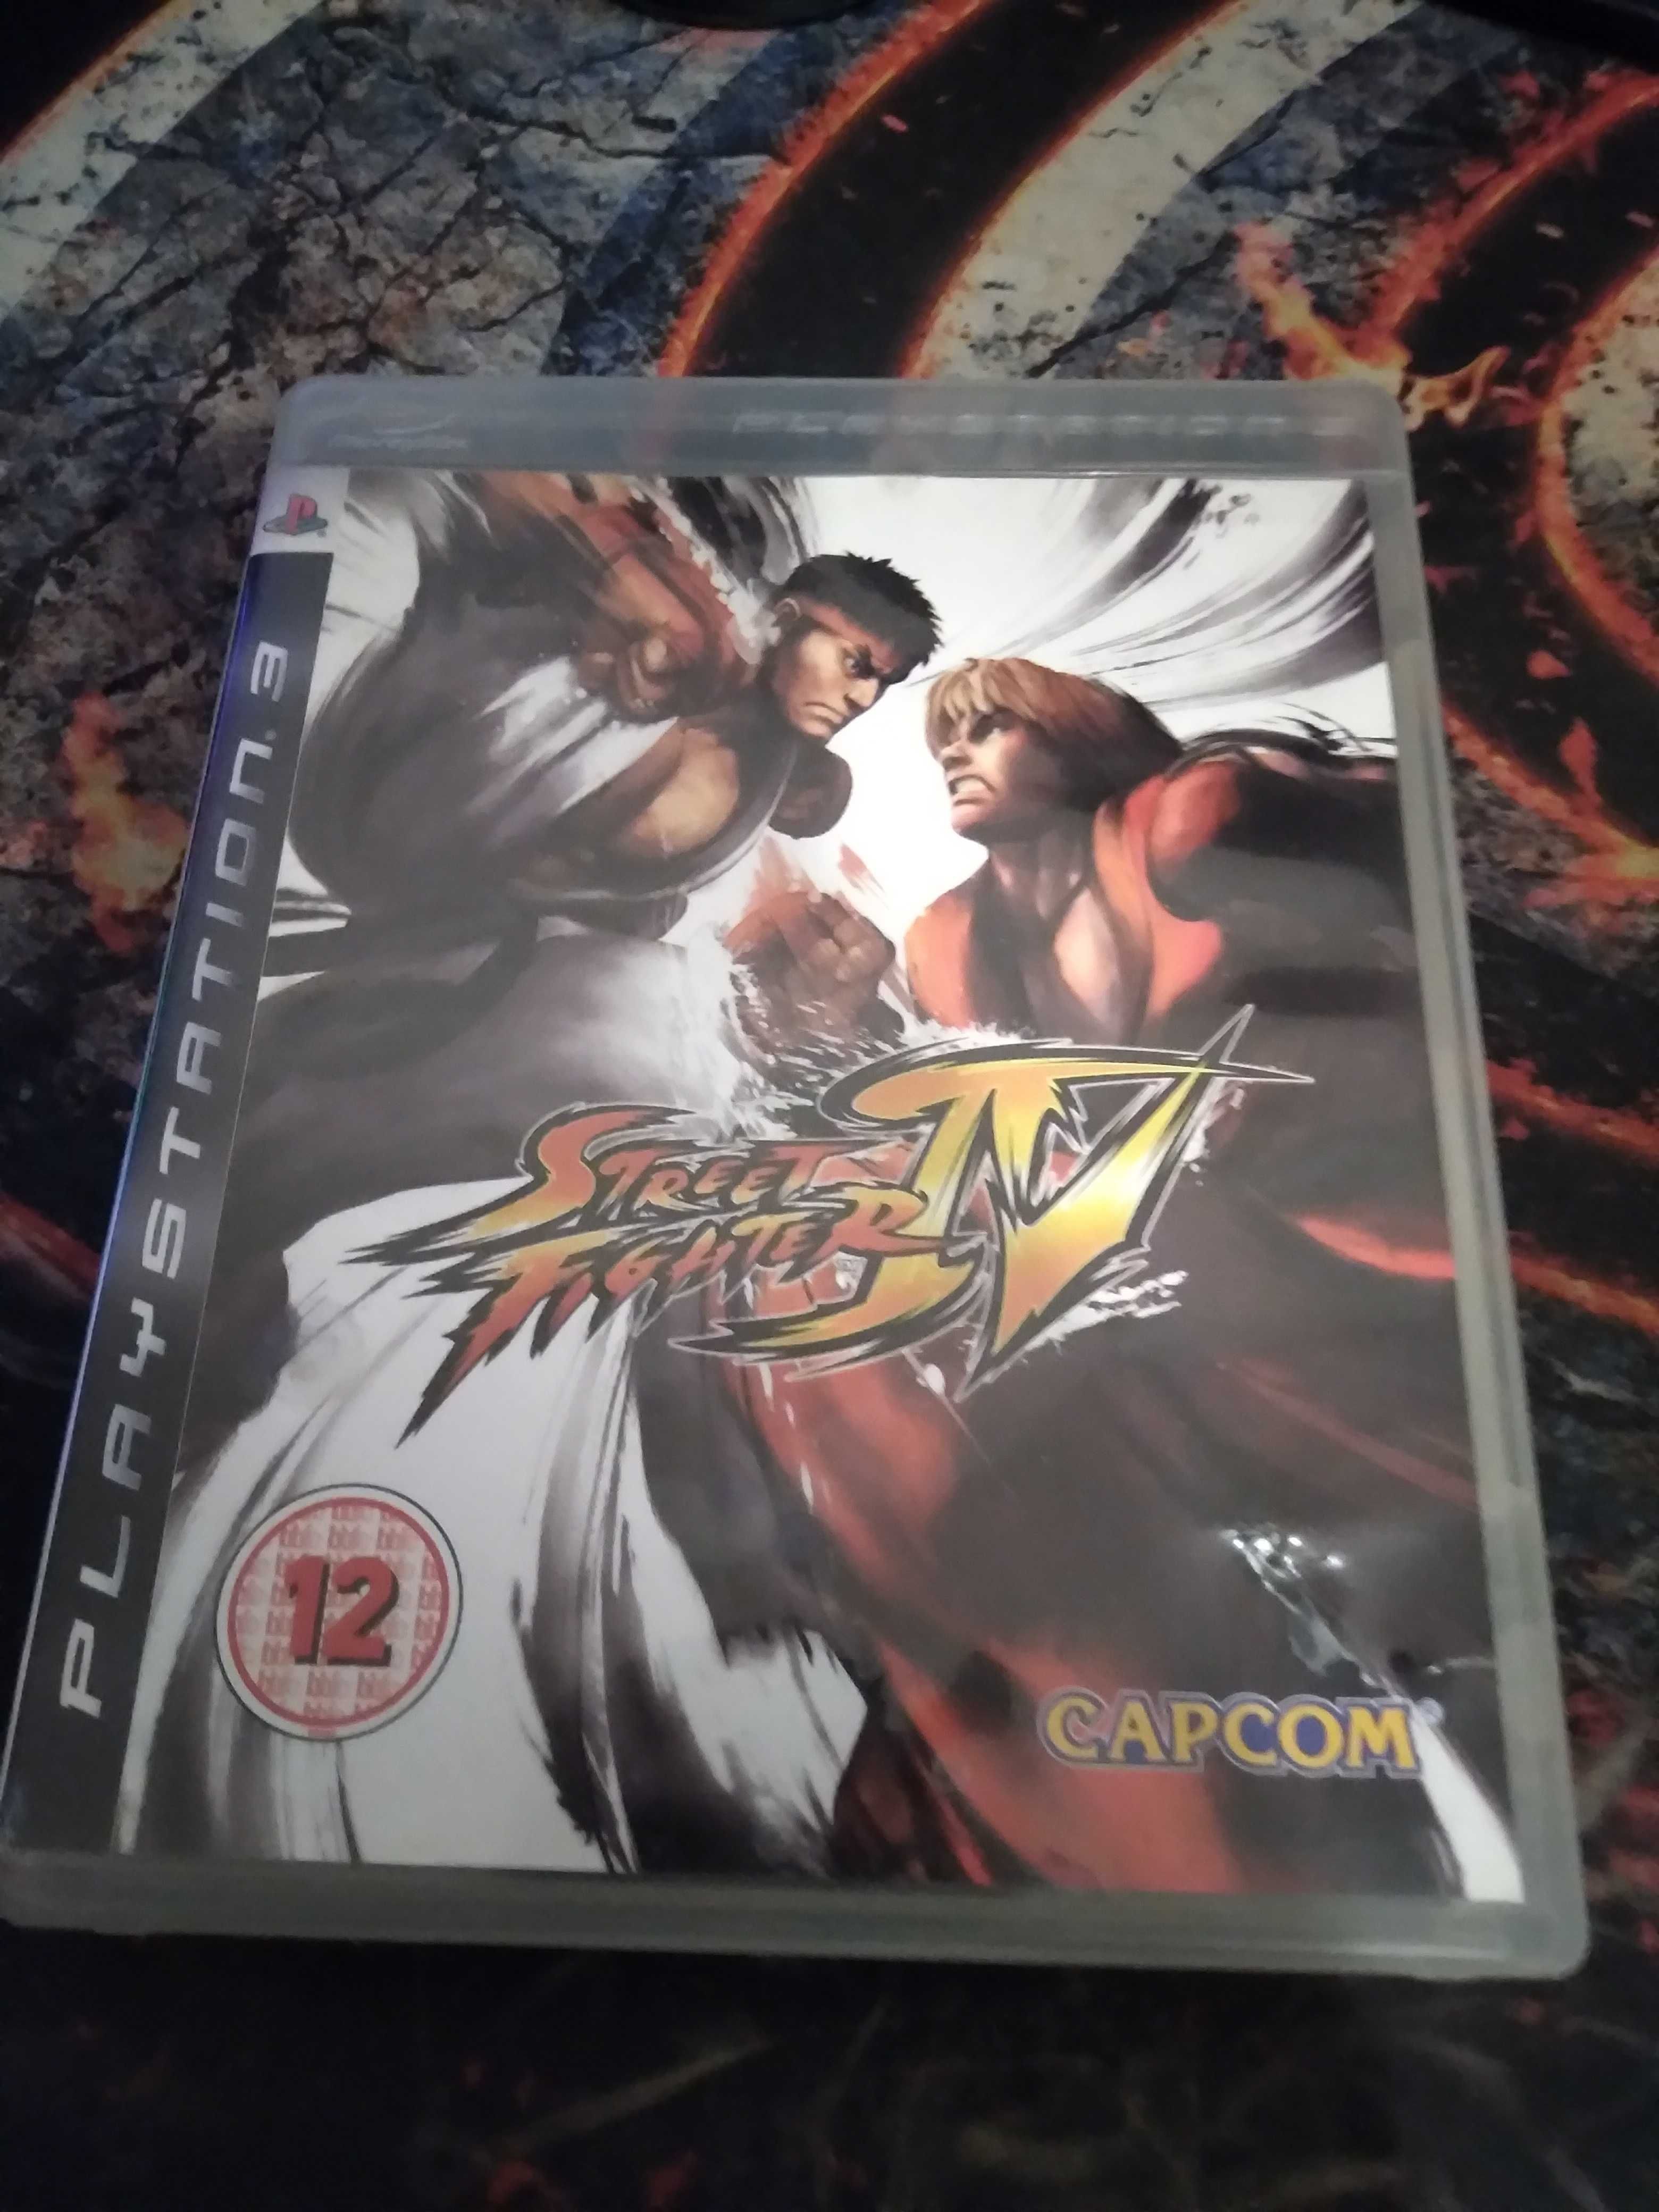 Street fighter 4 IV ps3